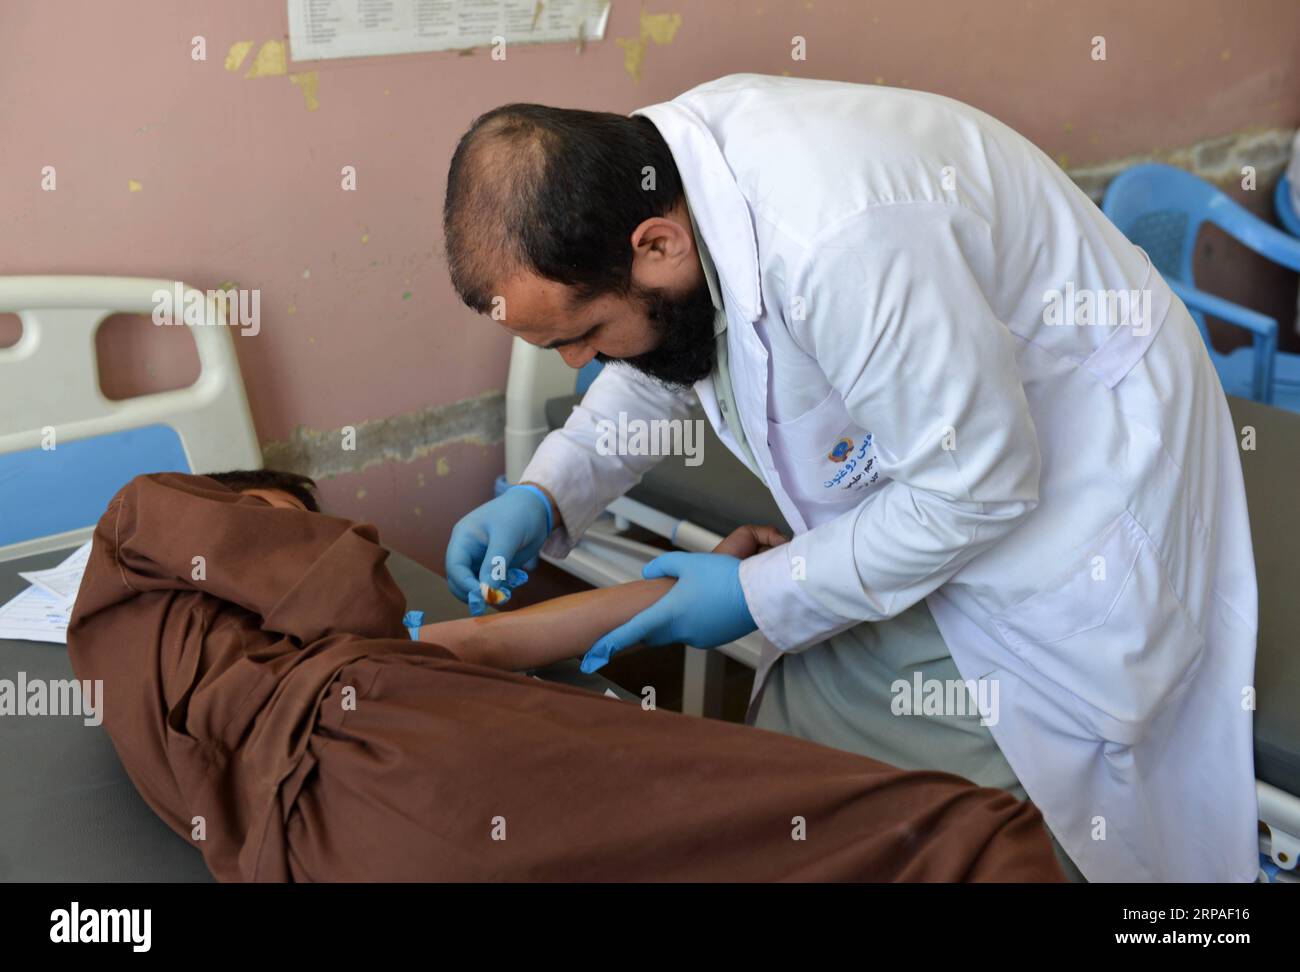 (190507) -- KANDAHAR, May 7, 2019 -- An Afghan man receives medical treatment at the Mirwais Regional Hospital in Kandahar, Afghanistan, May 4, 2019. The Mirwais Regional Hospital, locally known as the Chinese Hospital , was built by China in 1974 and put into operation in 1979 on 44 acres of land in Kandahar, the largest city in the southern region as a gift to the Afghan people. The hospital is the largest health center in Afghanistan s southern region and provides almost all kinds of services to patients ranging from diagnosis of diseases to surgery of war victims, childcare and maternity. Stock Photo